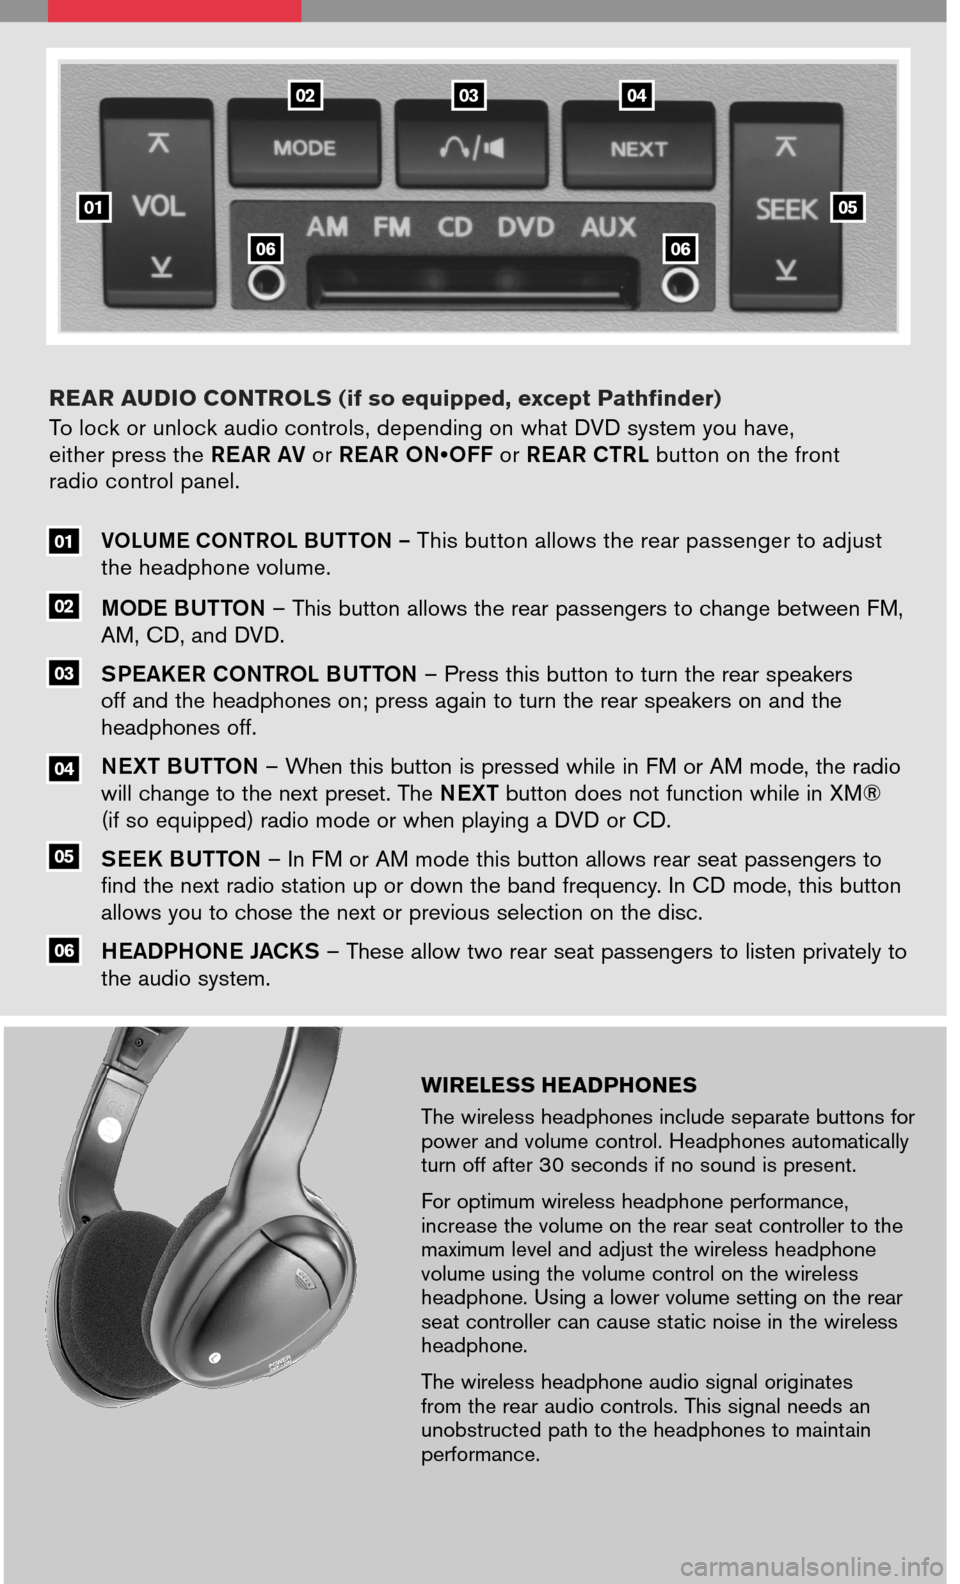 NISSAN XTERRA 2008 N50 / 2.G Entertainment Syst 
WIRELESS HEADPHONES
The wireless headphones include separate buttons for power and volume control. Headphones automatically turn off after 30 seconds if no sound is present.
For optimum wireless head